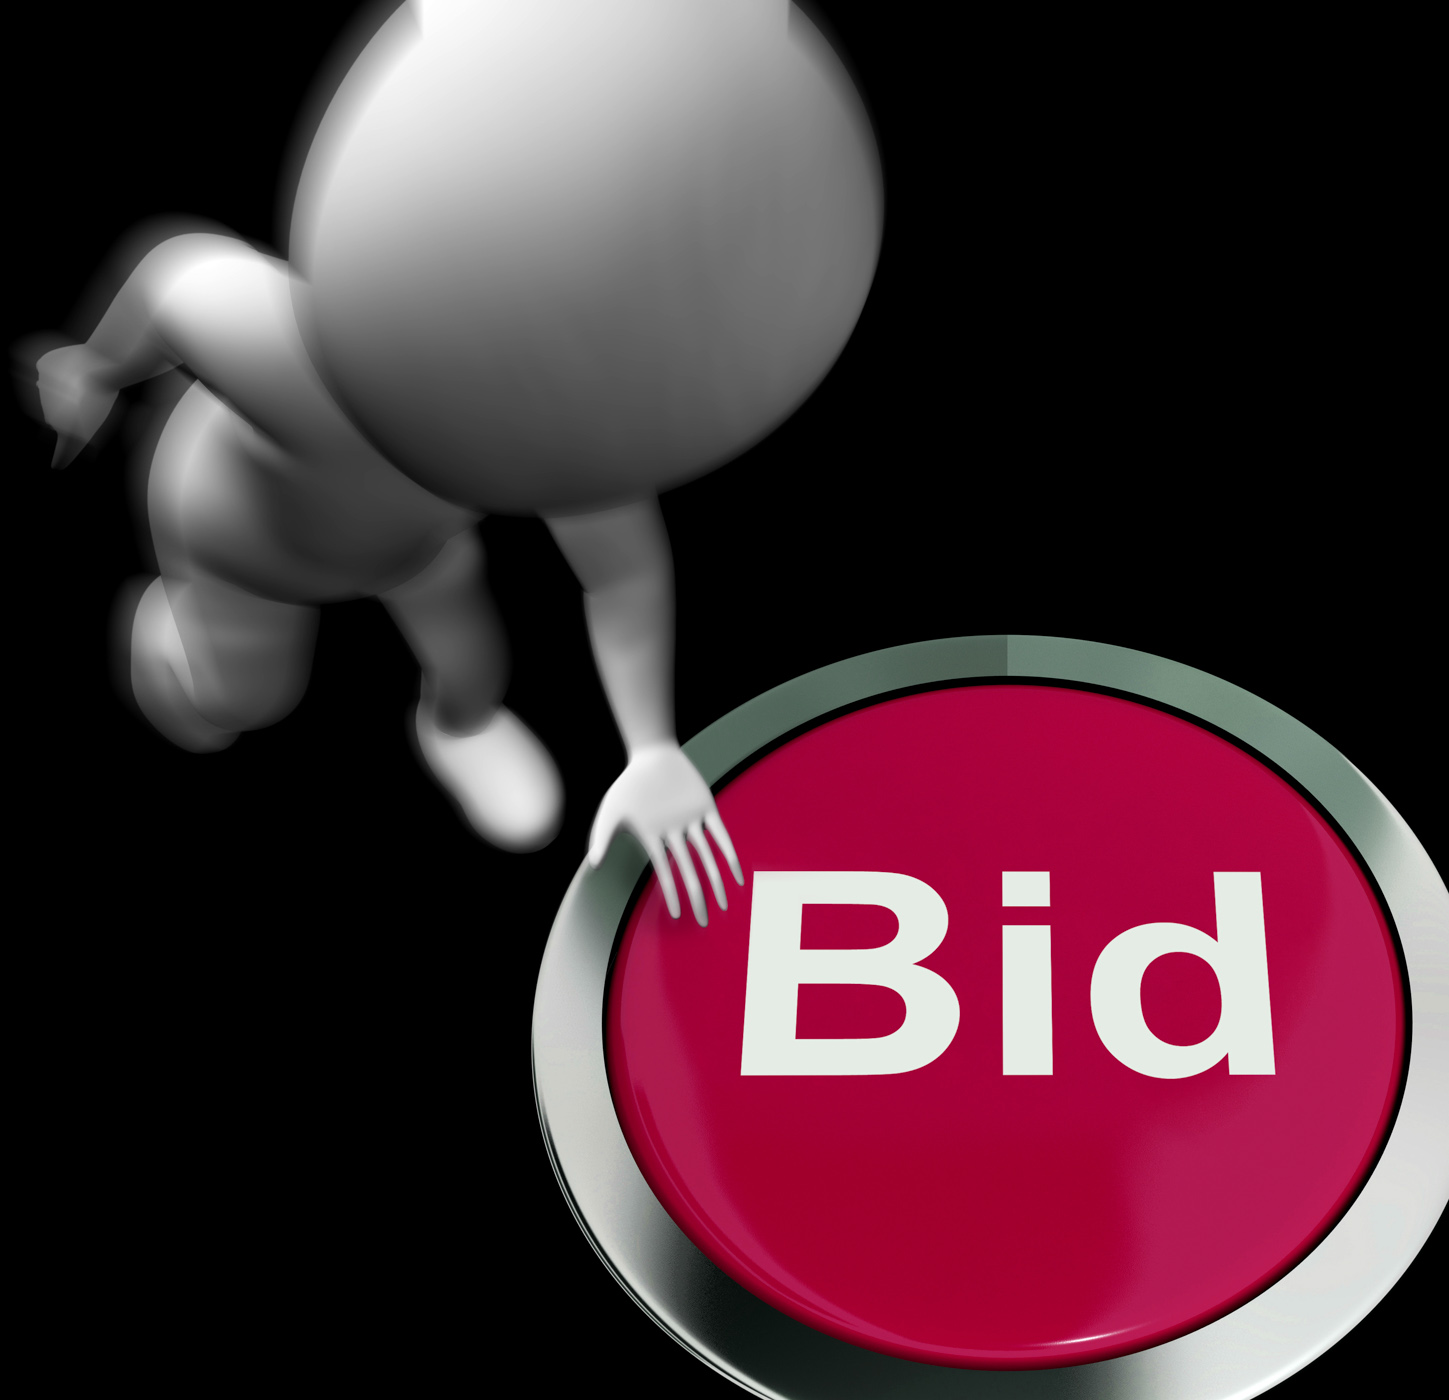 Bid pressed shows auction buying and selling photo